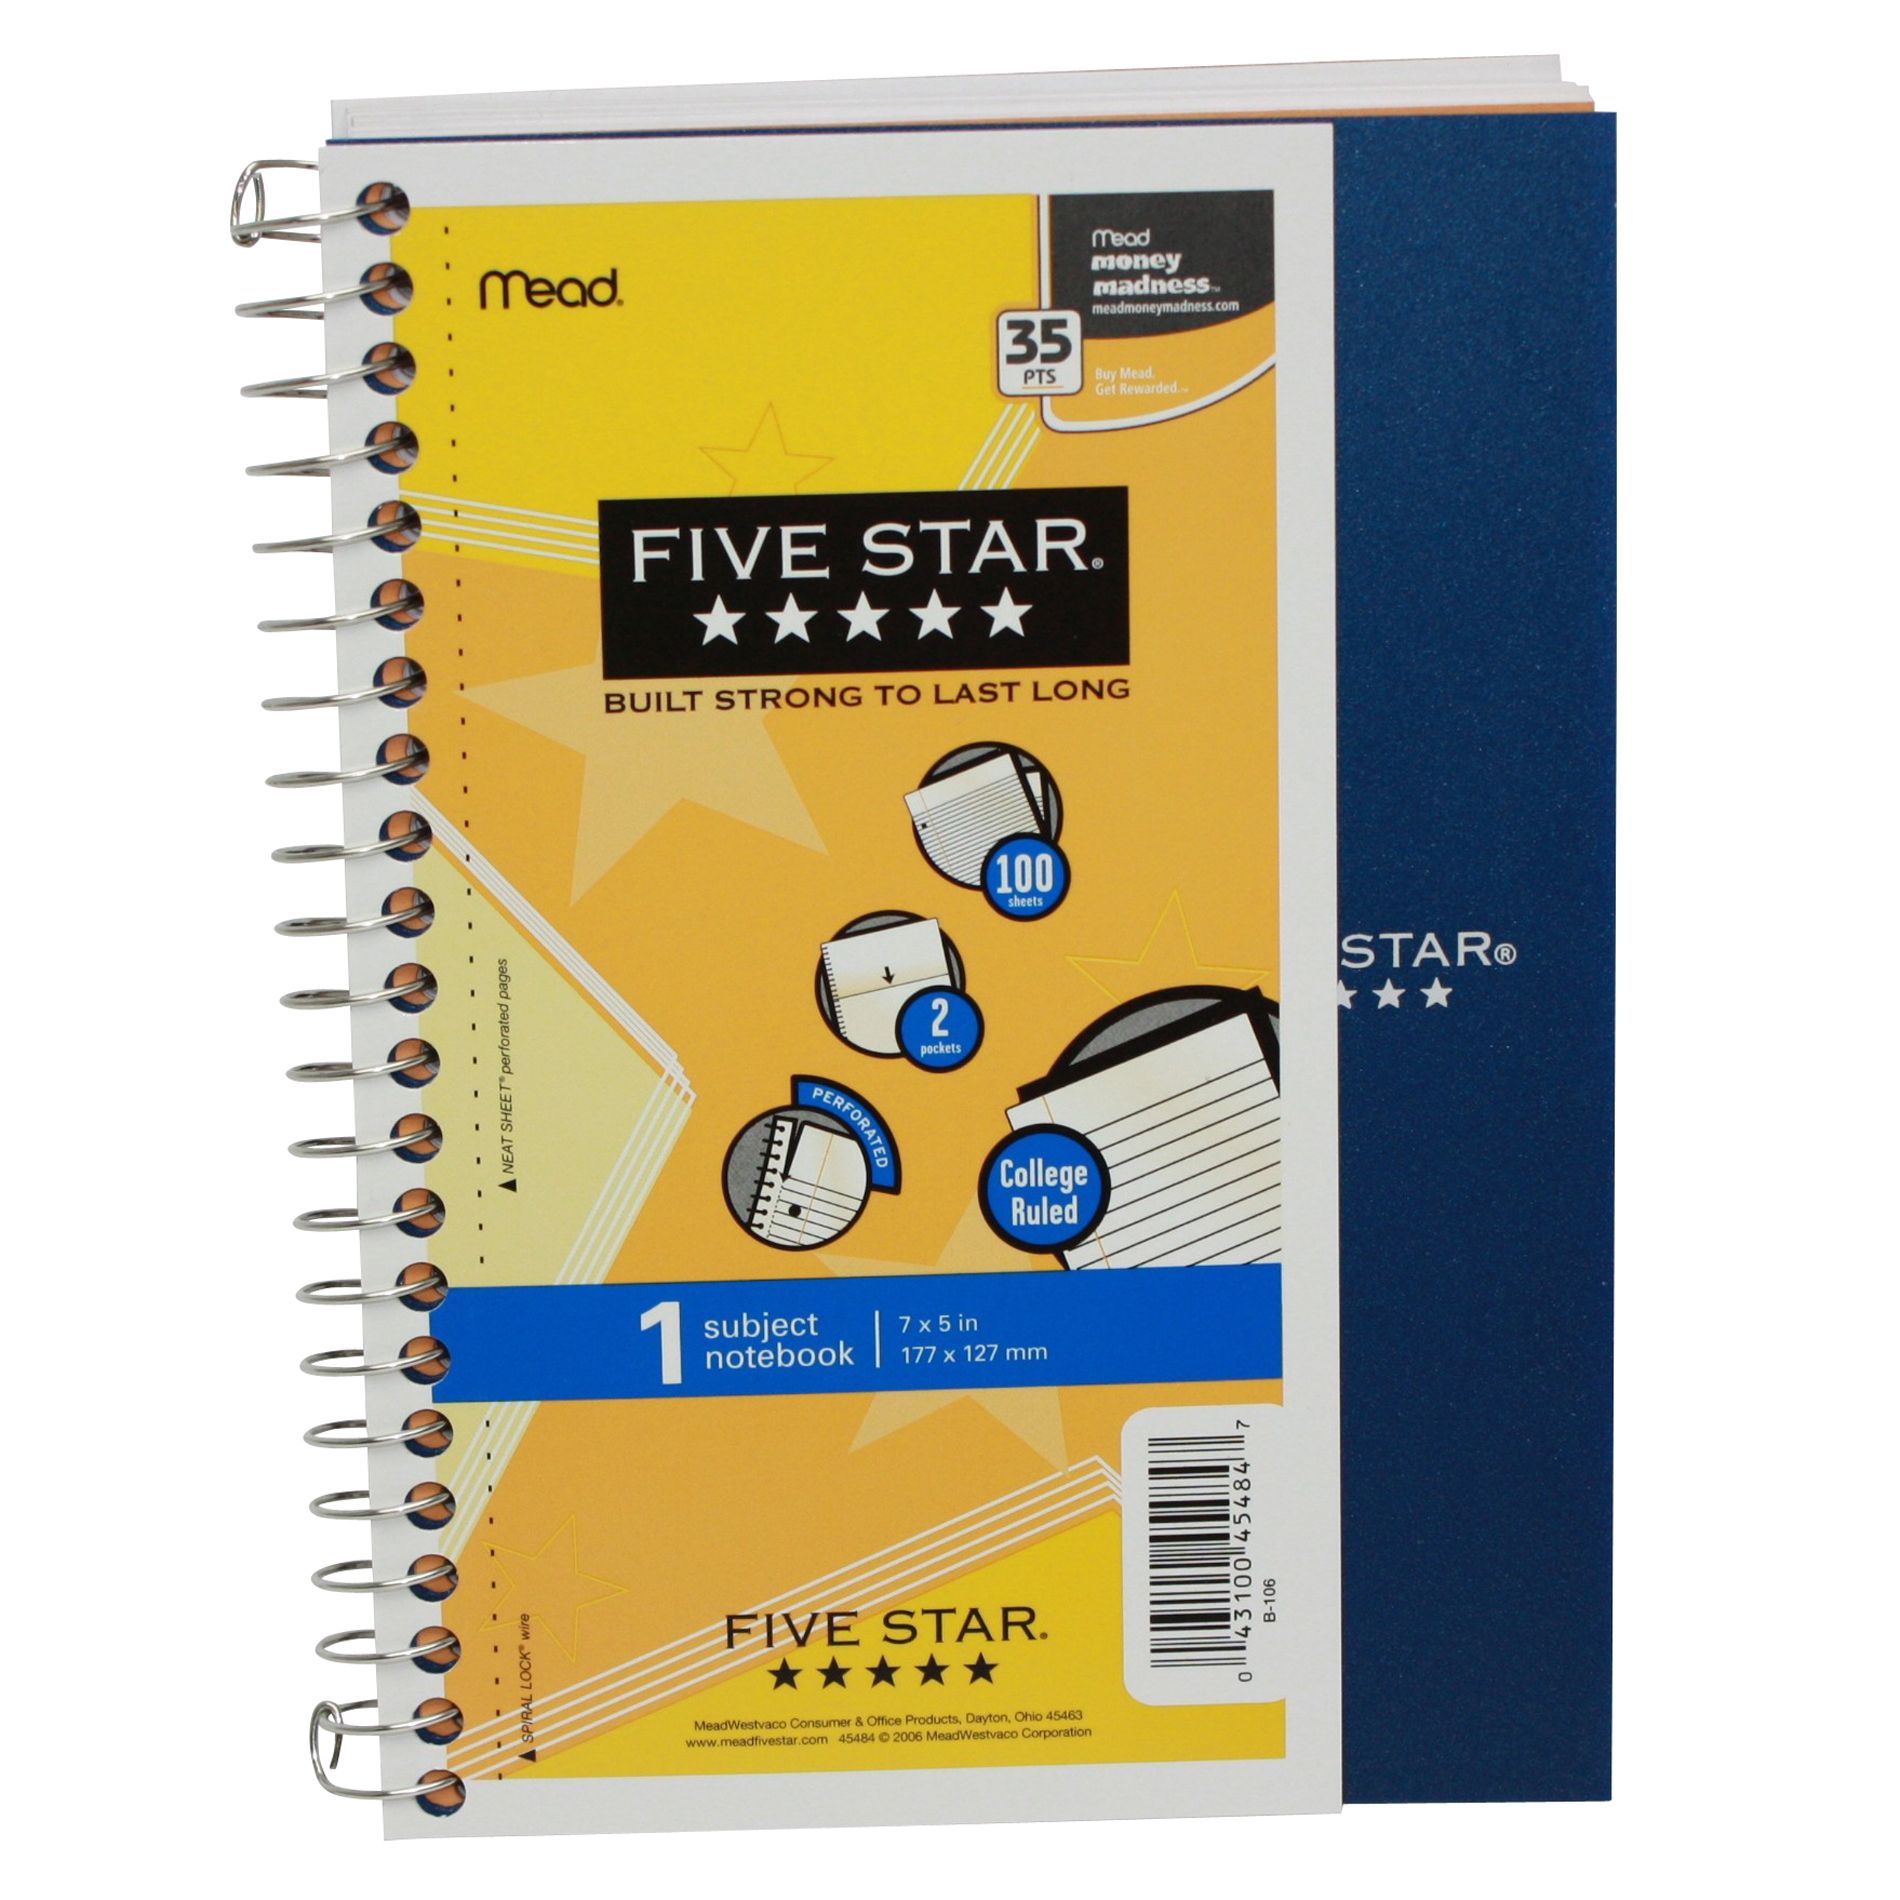 Mead 34652811a Personal Notebook, College Ruled, 100 Sheets, 1 notebook - 7 x 5 in, Assorted Colors